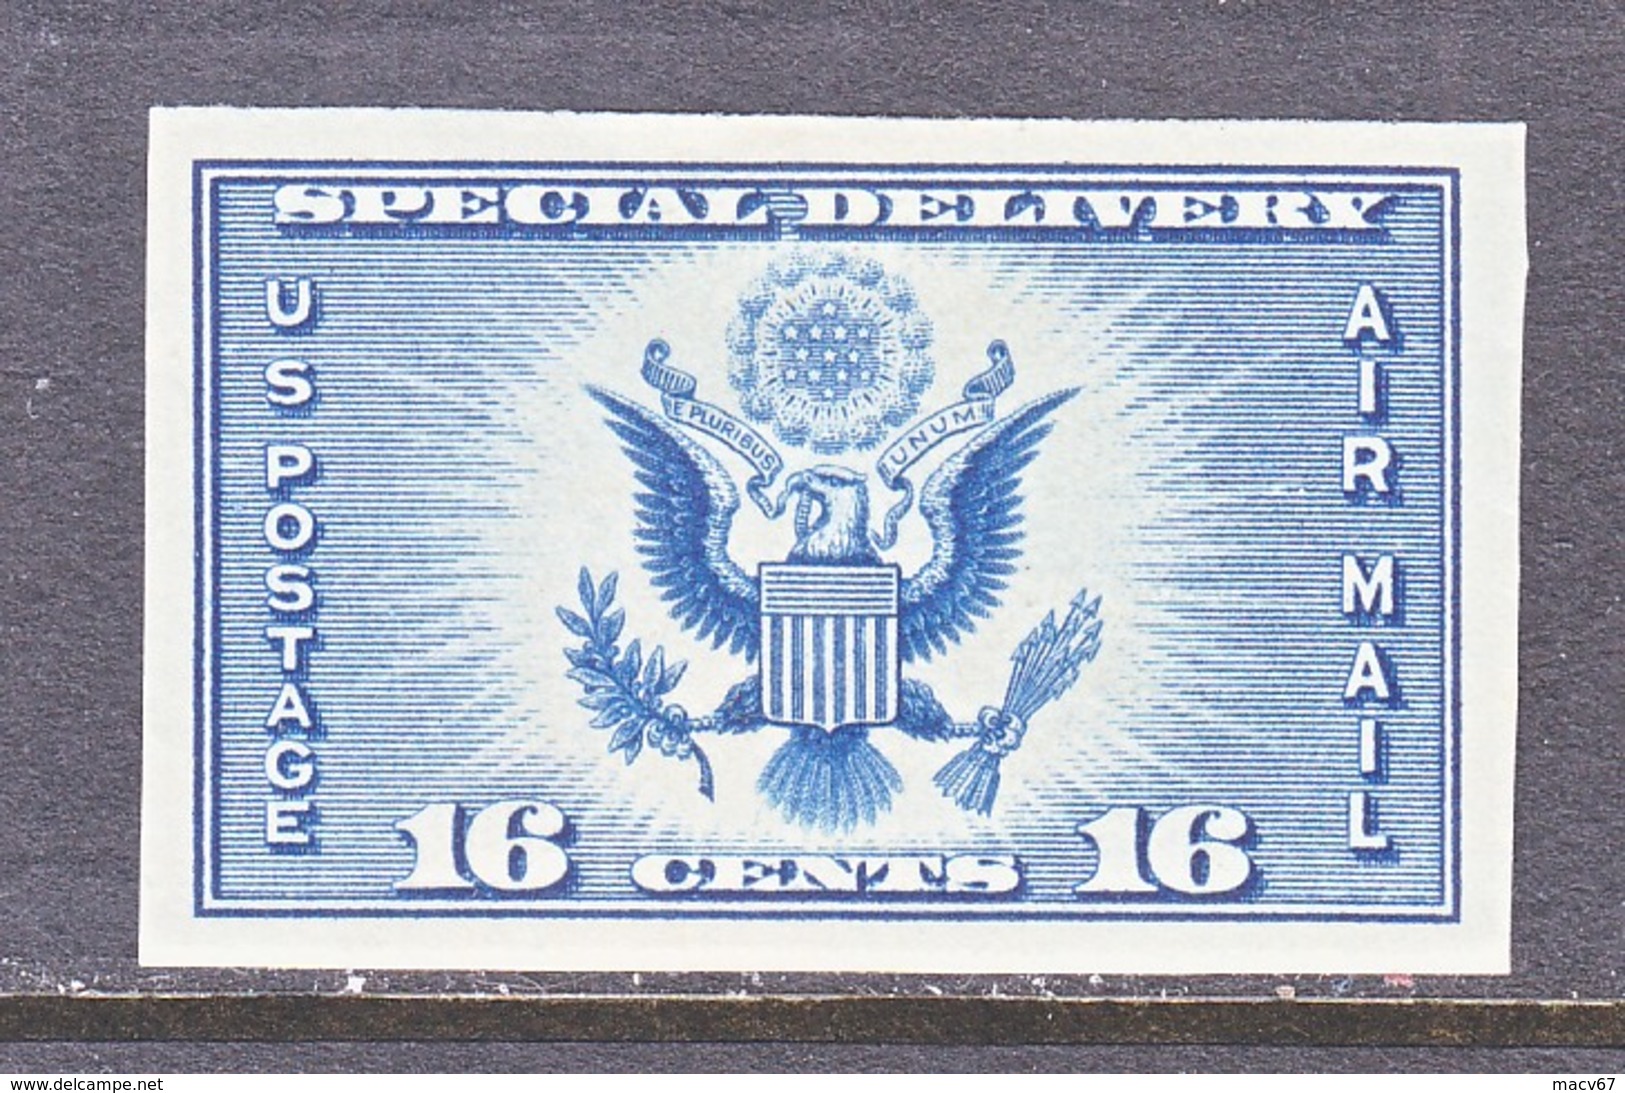 U.S.  771   *  SEAL  OF  AMERICA     SPECIAL  PRINTING   Issued No Gum. - Unused Stamps